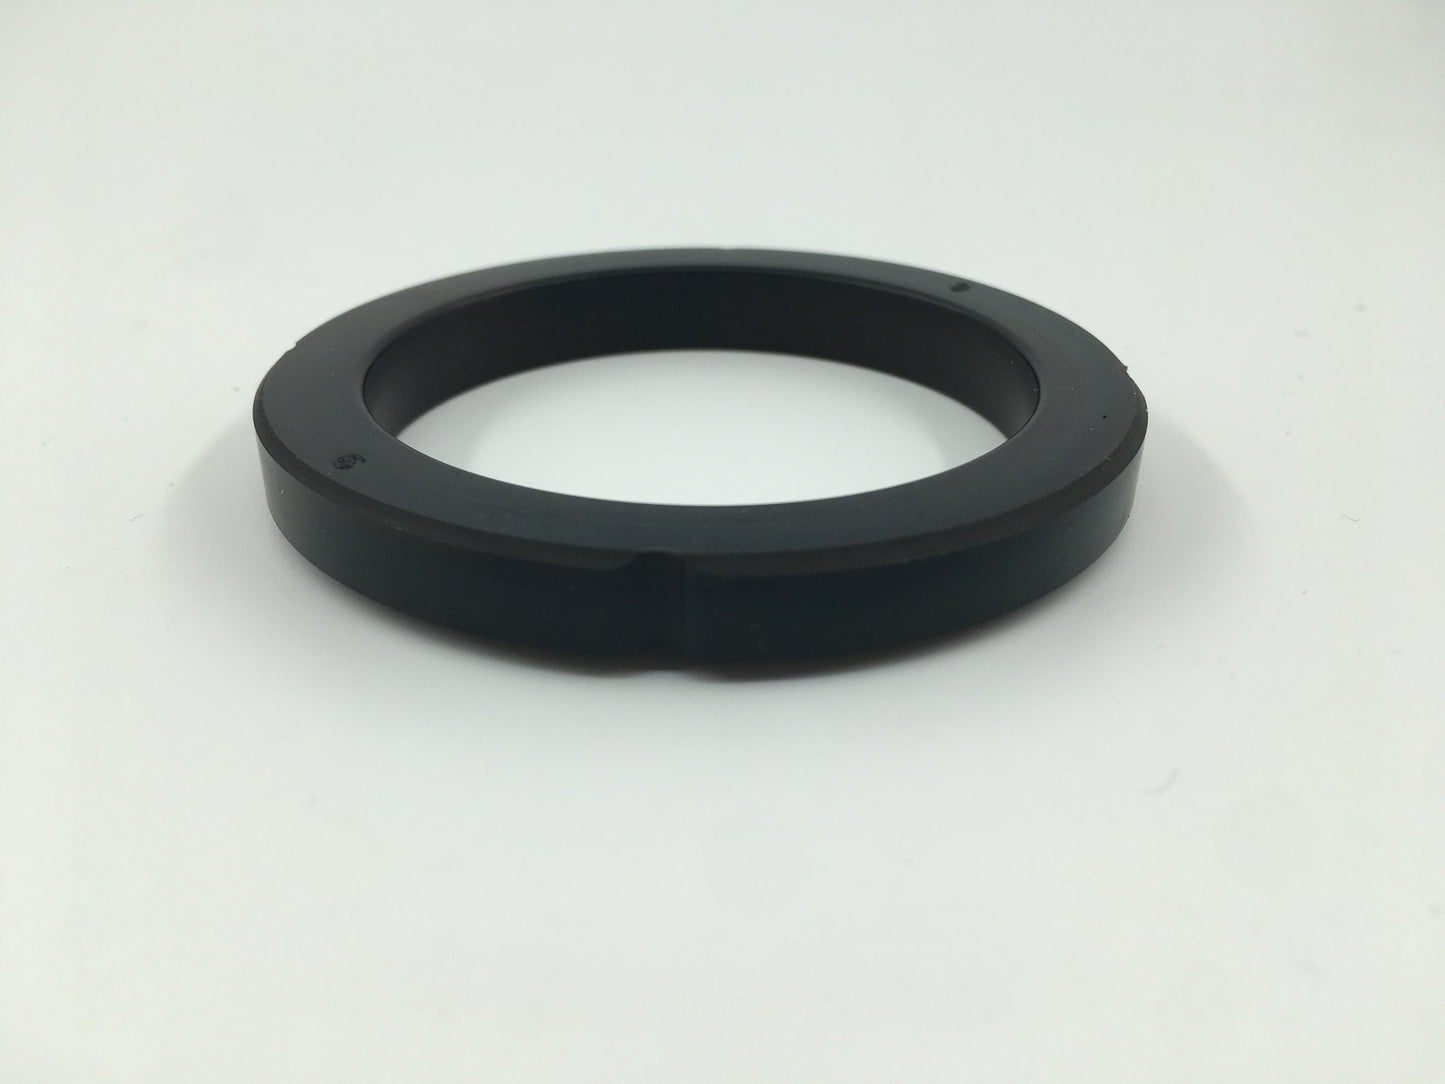 Group Seal - La Marzocco 9mm group gaskets